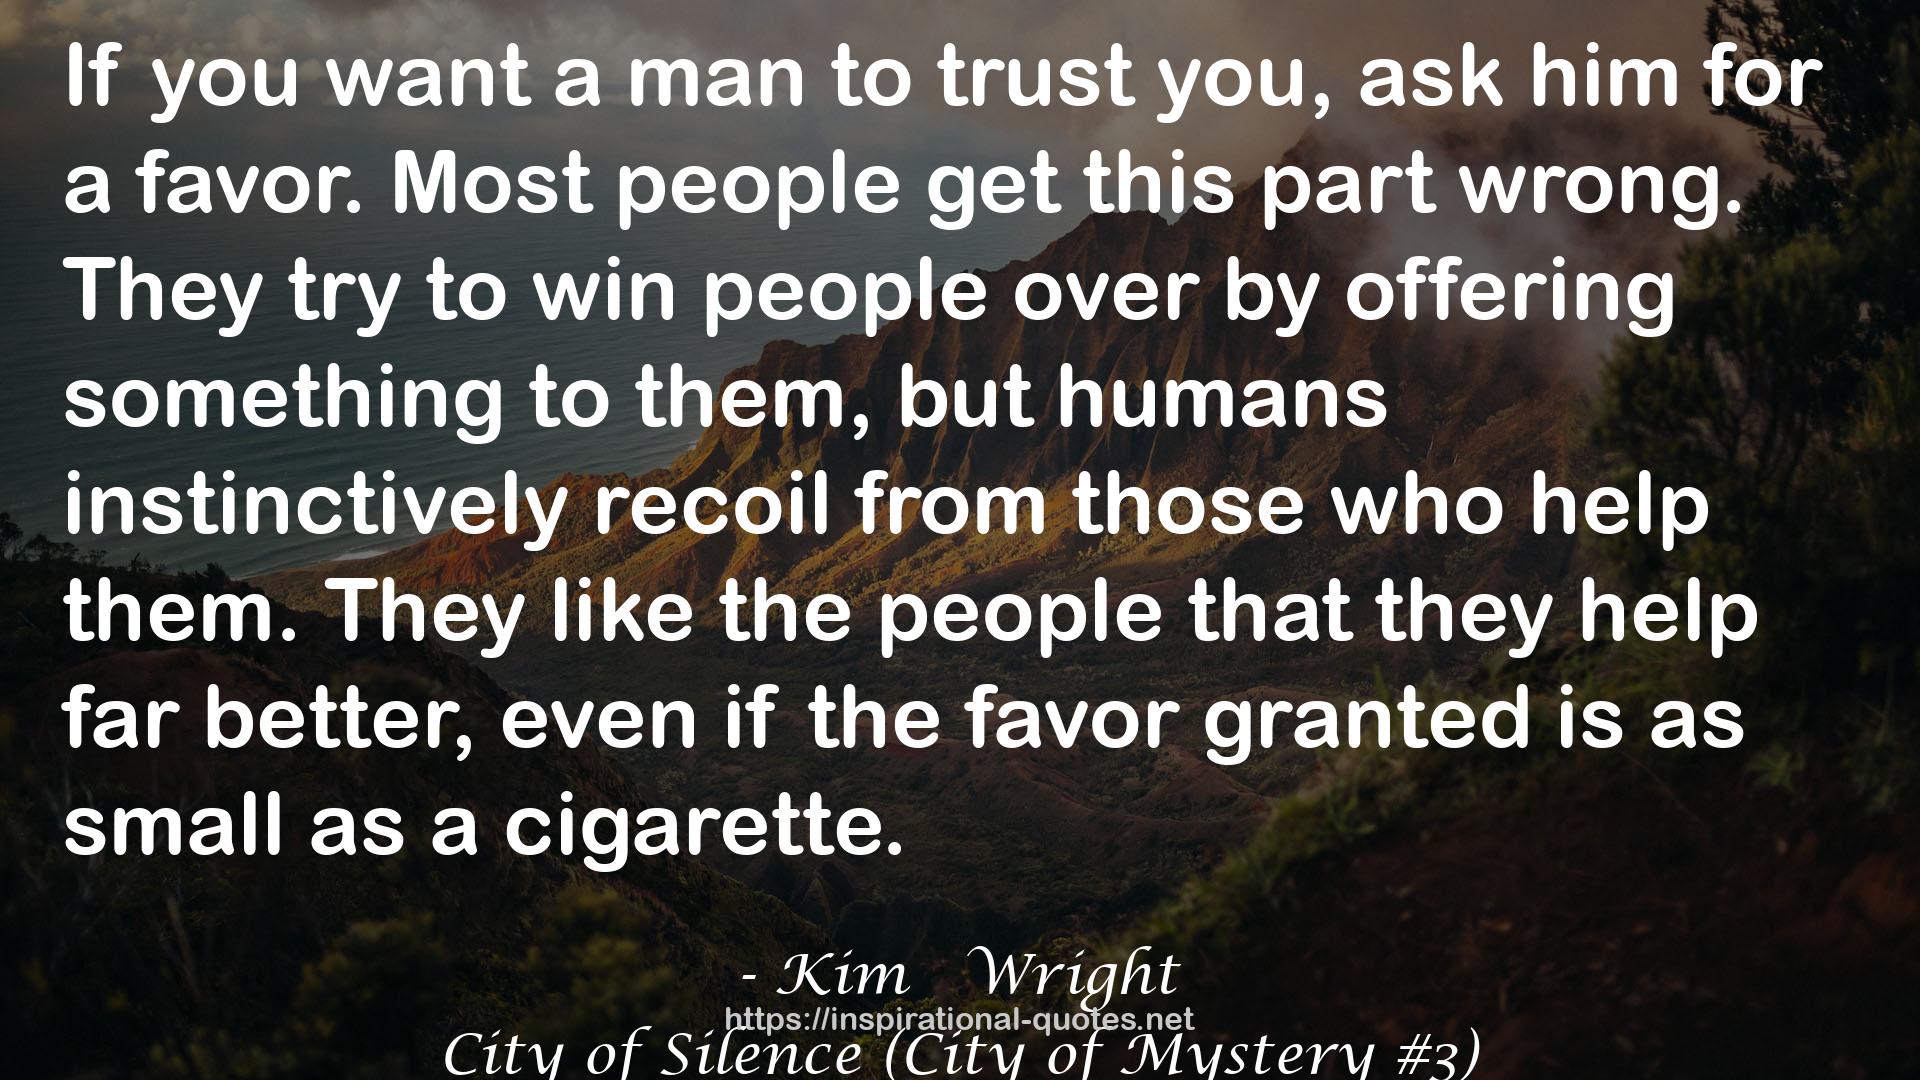 City of Silence (City of Mystery #3) QUOTES